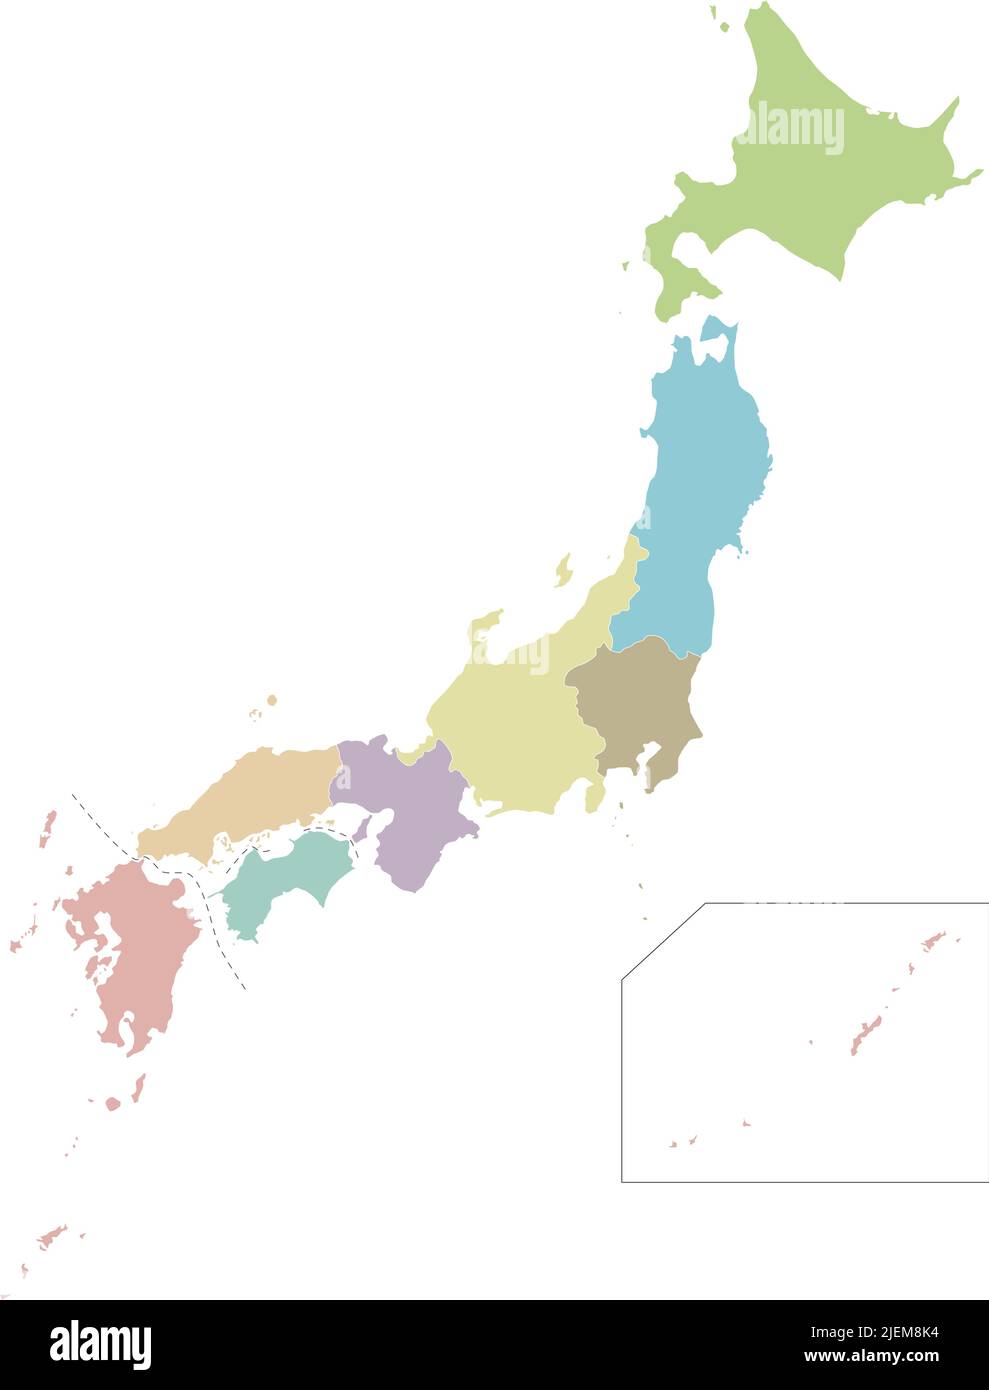 Vector blank map of Japan with regions and administrative divisions. Editable and clearly labeled layers. Stock Vector